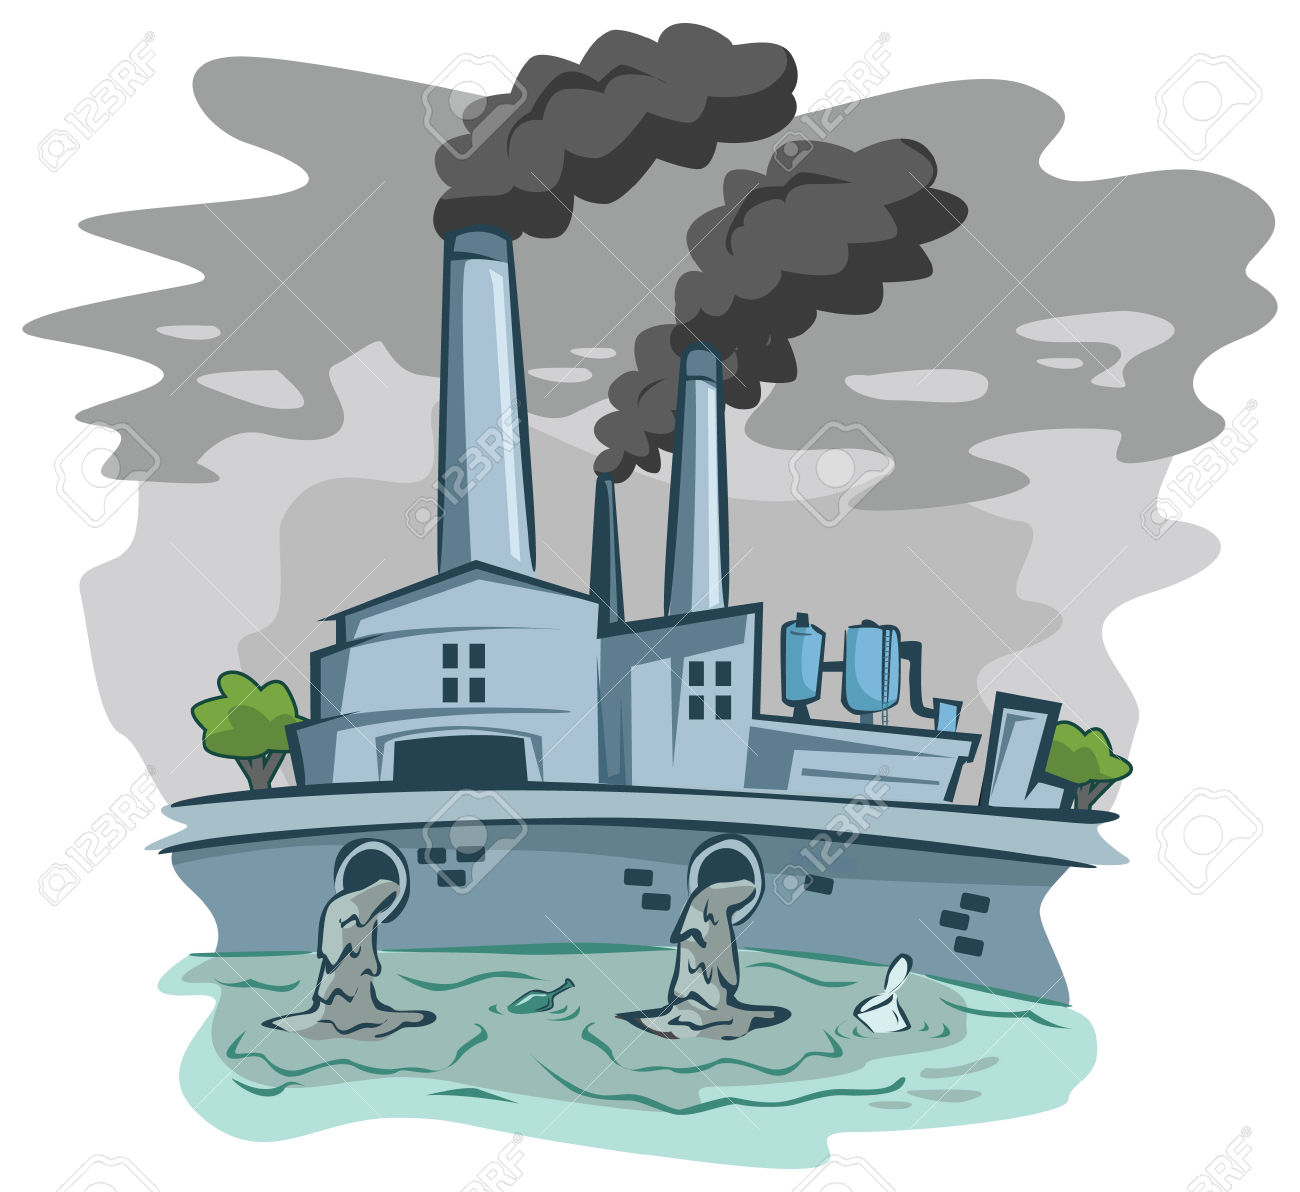 Free Pollution Clipart Pollution Clipart Illustration Pollution ...